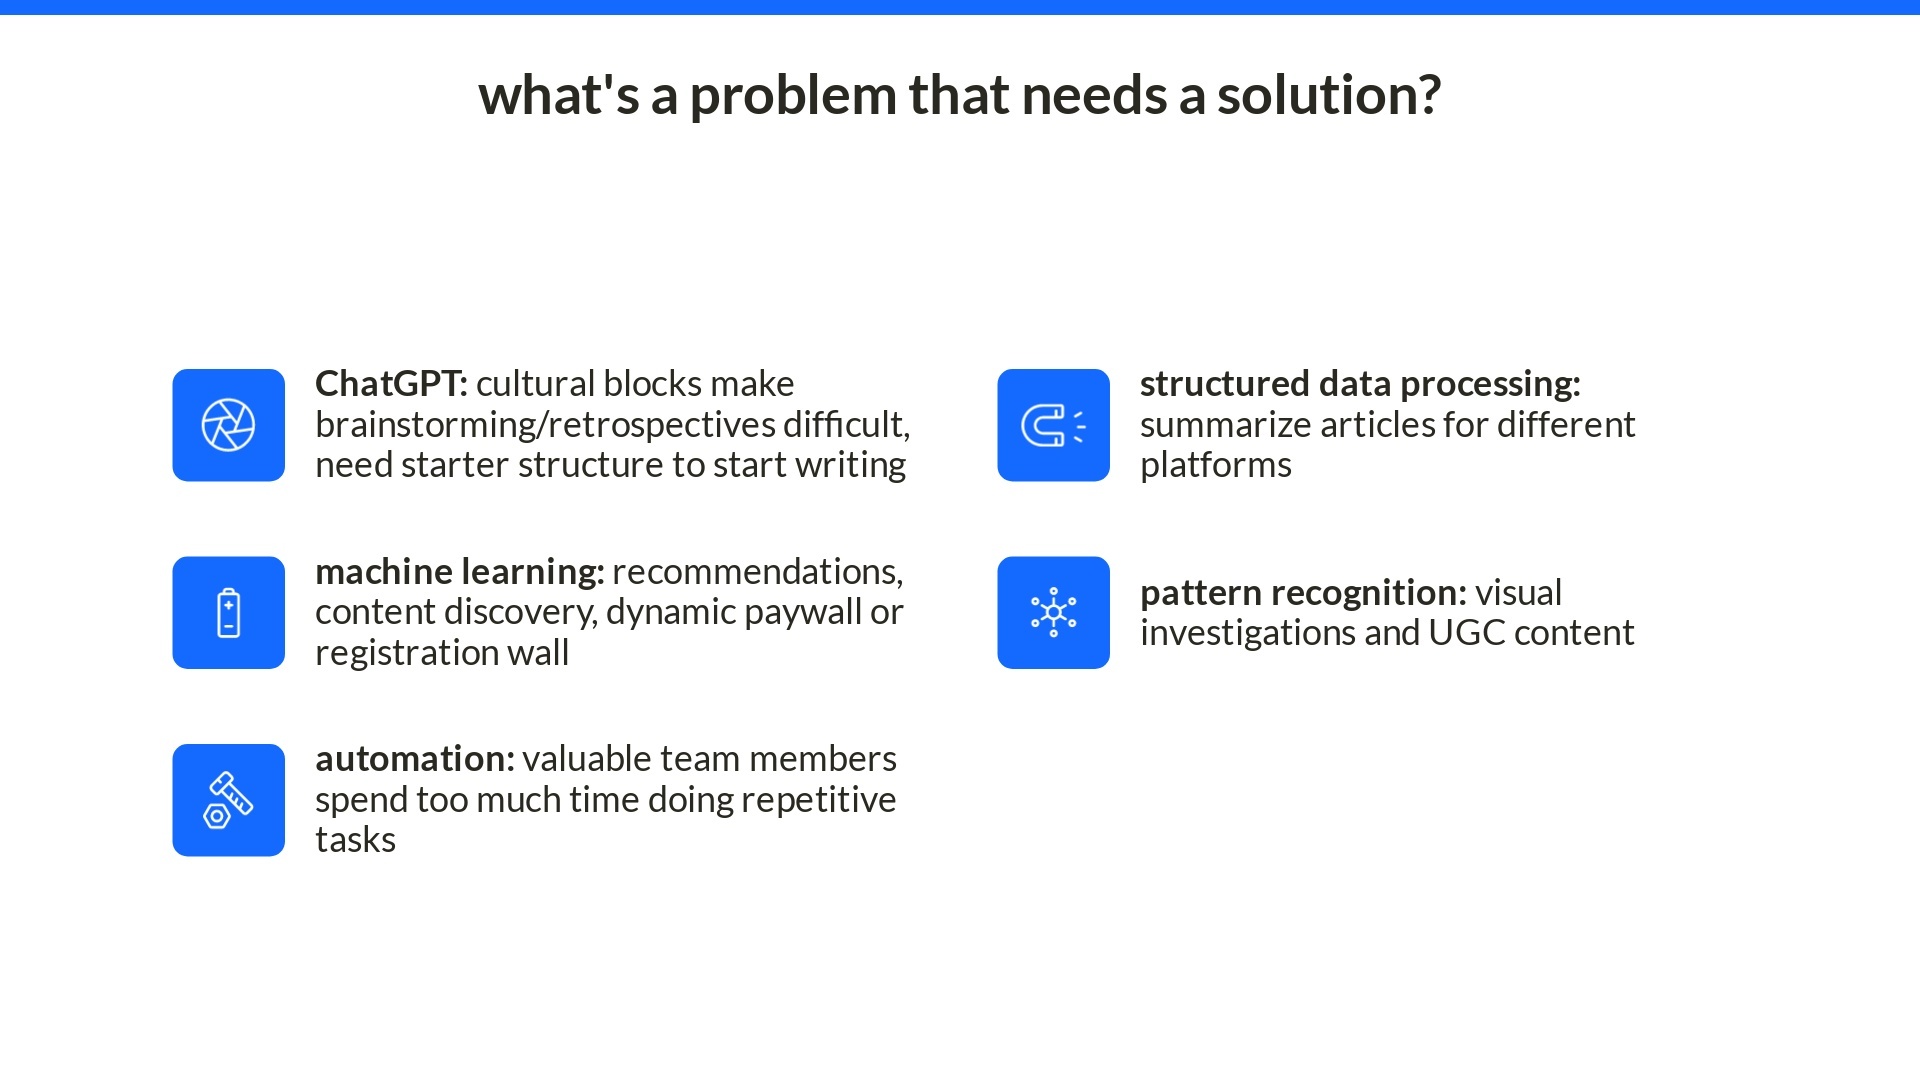 What's a problem that needs a solution? Consider how ChatGPT, machine learning, automation, structured data processing or pattern recognition could help solve a problem in your newsroom.